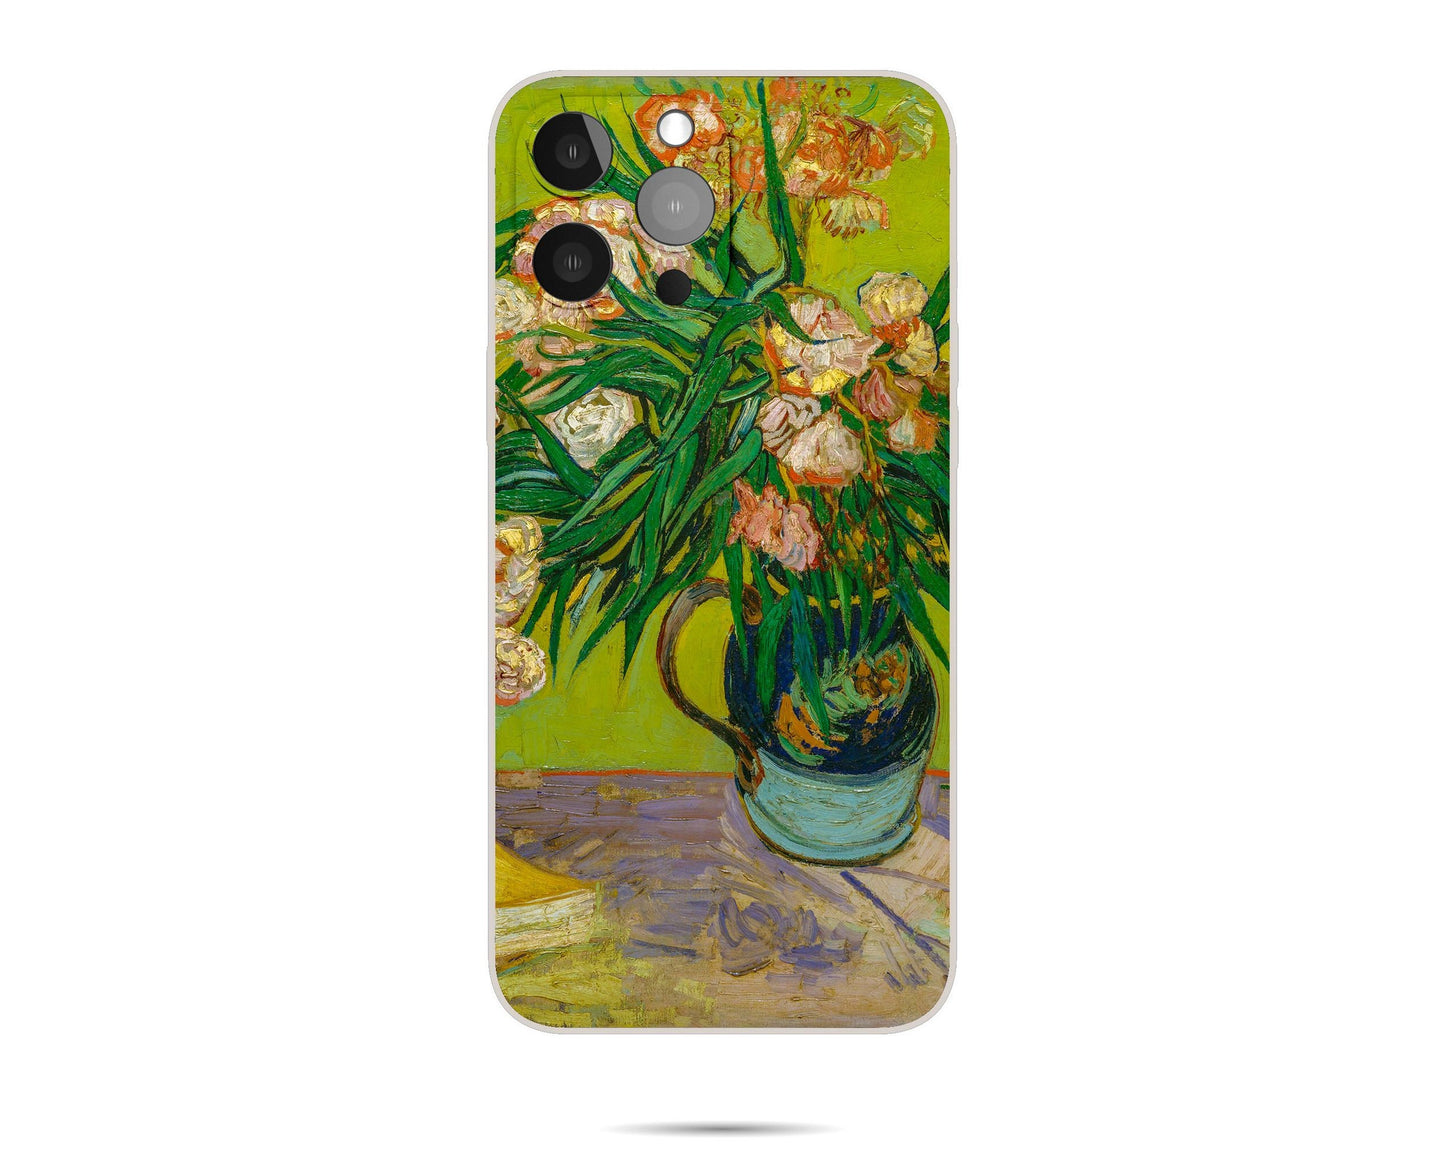 Iphone 14 Case Of Vincent Van Gogh Painting Oleanders, Iphone 11 Case, Iphone Xs Case, Designer Iphone 8 Plus Case, Iphone Case Protective